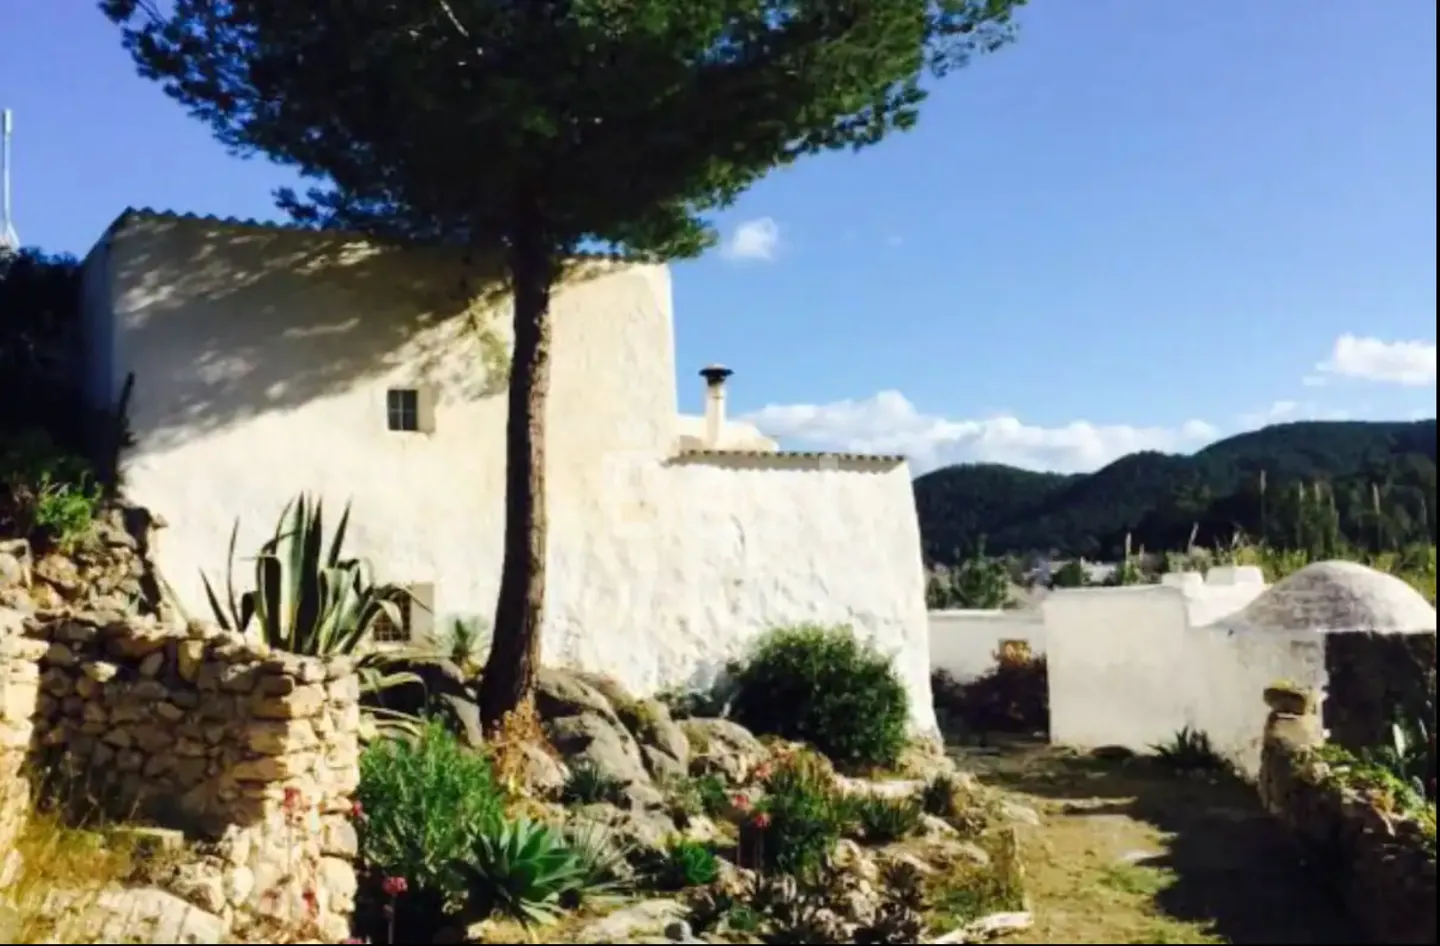 Chic 500 year old finca for rent in San Juan, Ibiza REF: CAN CHEE